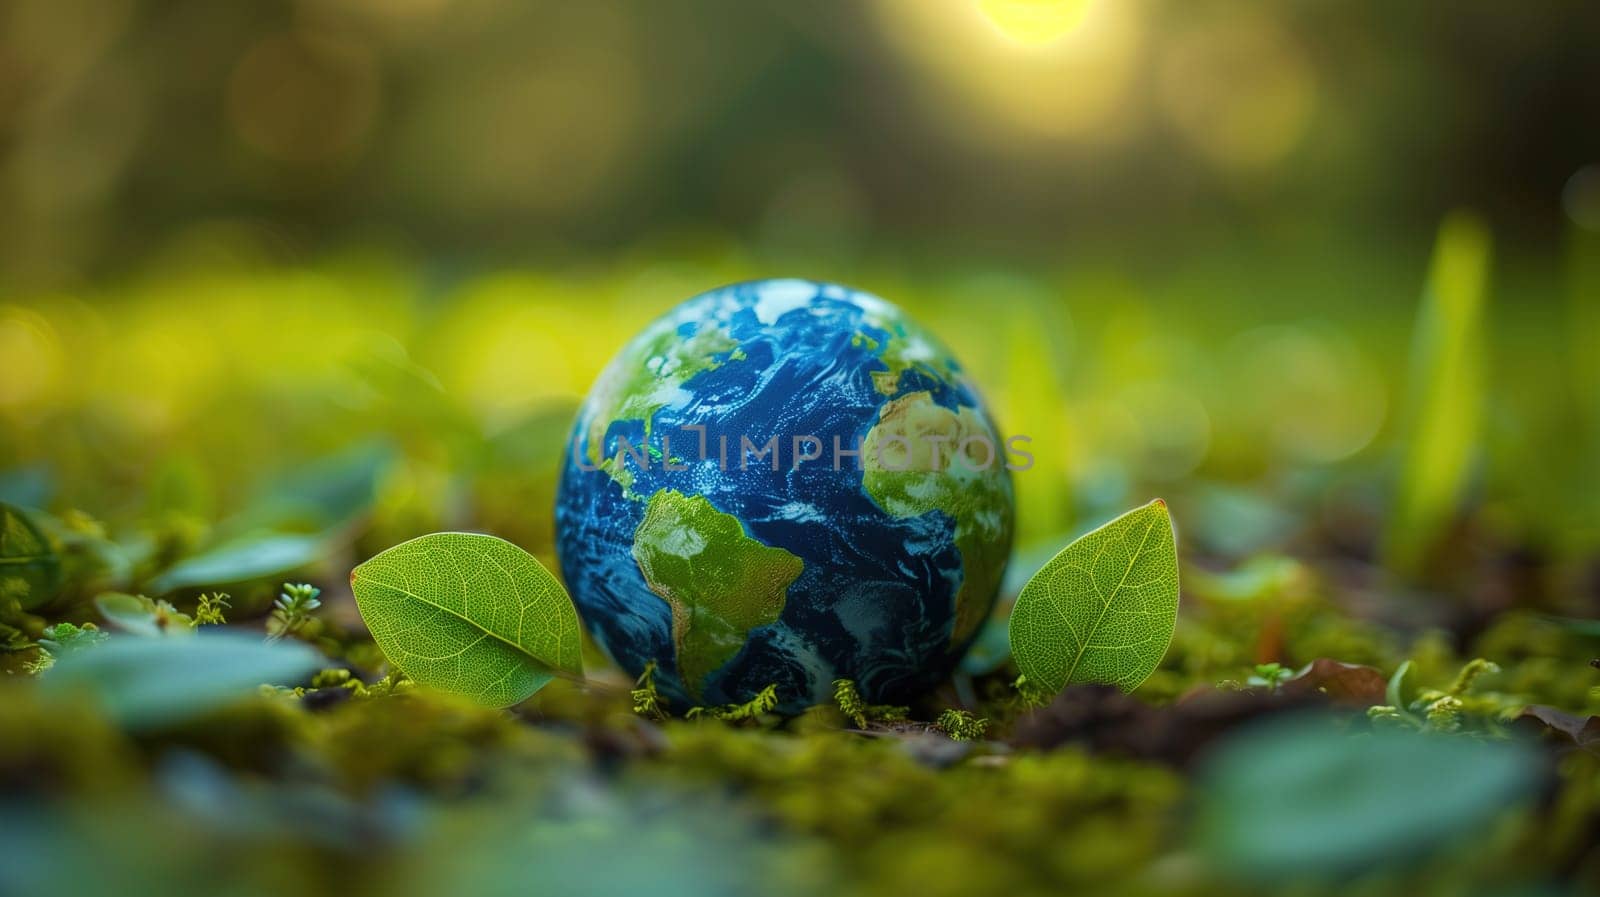 A blue earth model is placed on top of a vibrant, lush green field. The contrast between the deep blue color of the earth and the lively green of the field is striking.